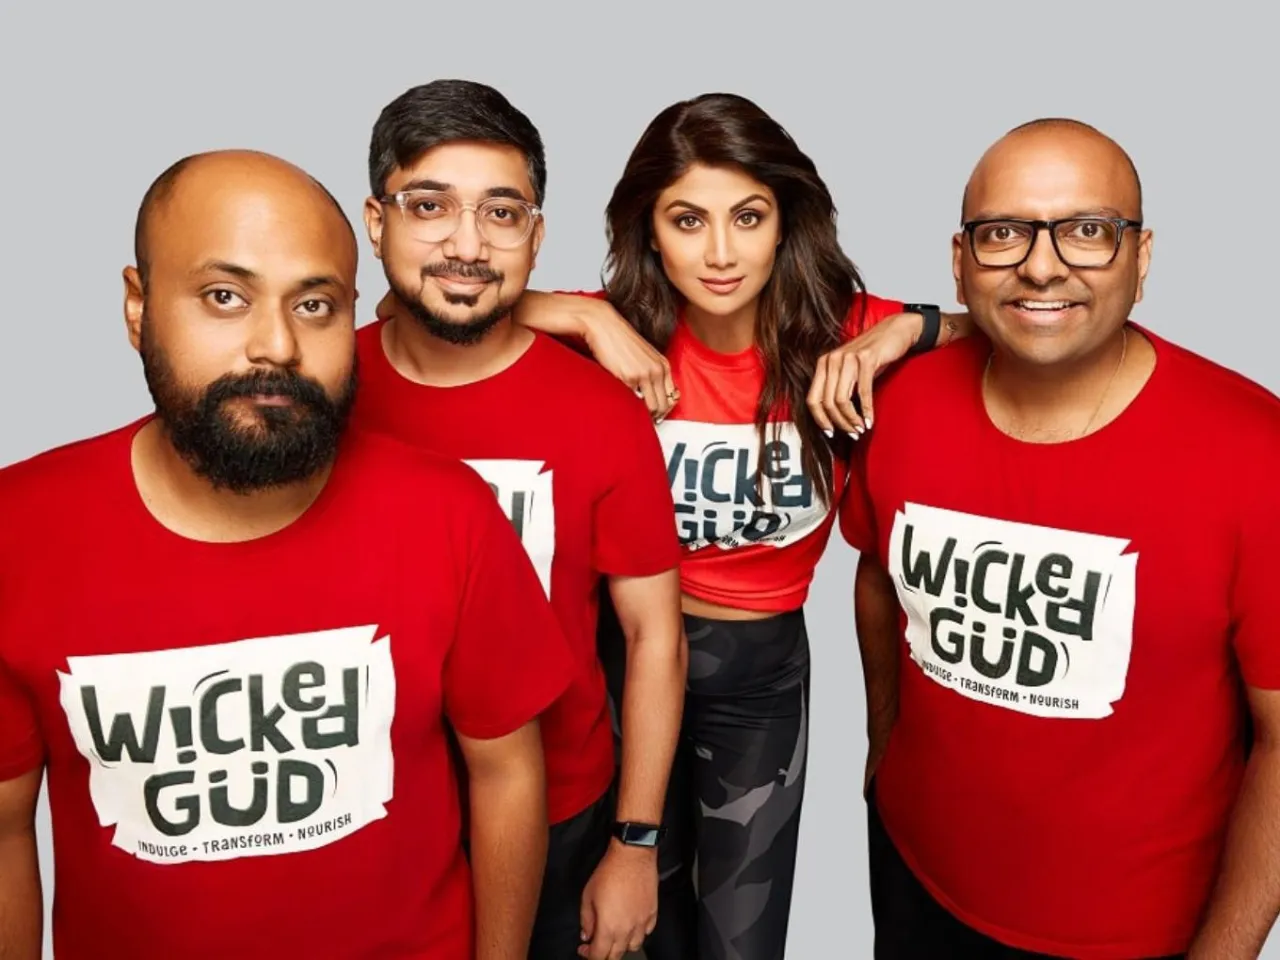 Actress Shilpa Shetty invests Rs 2.25 crore in D2C brand WickedGud